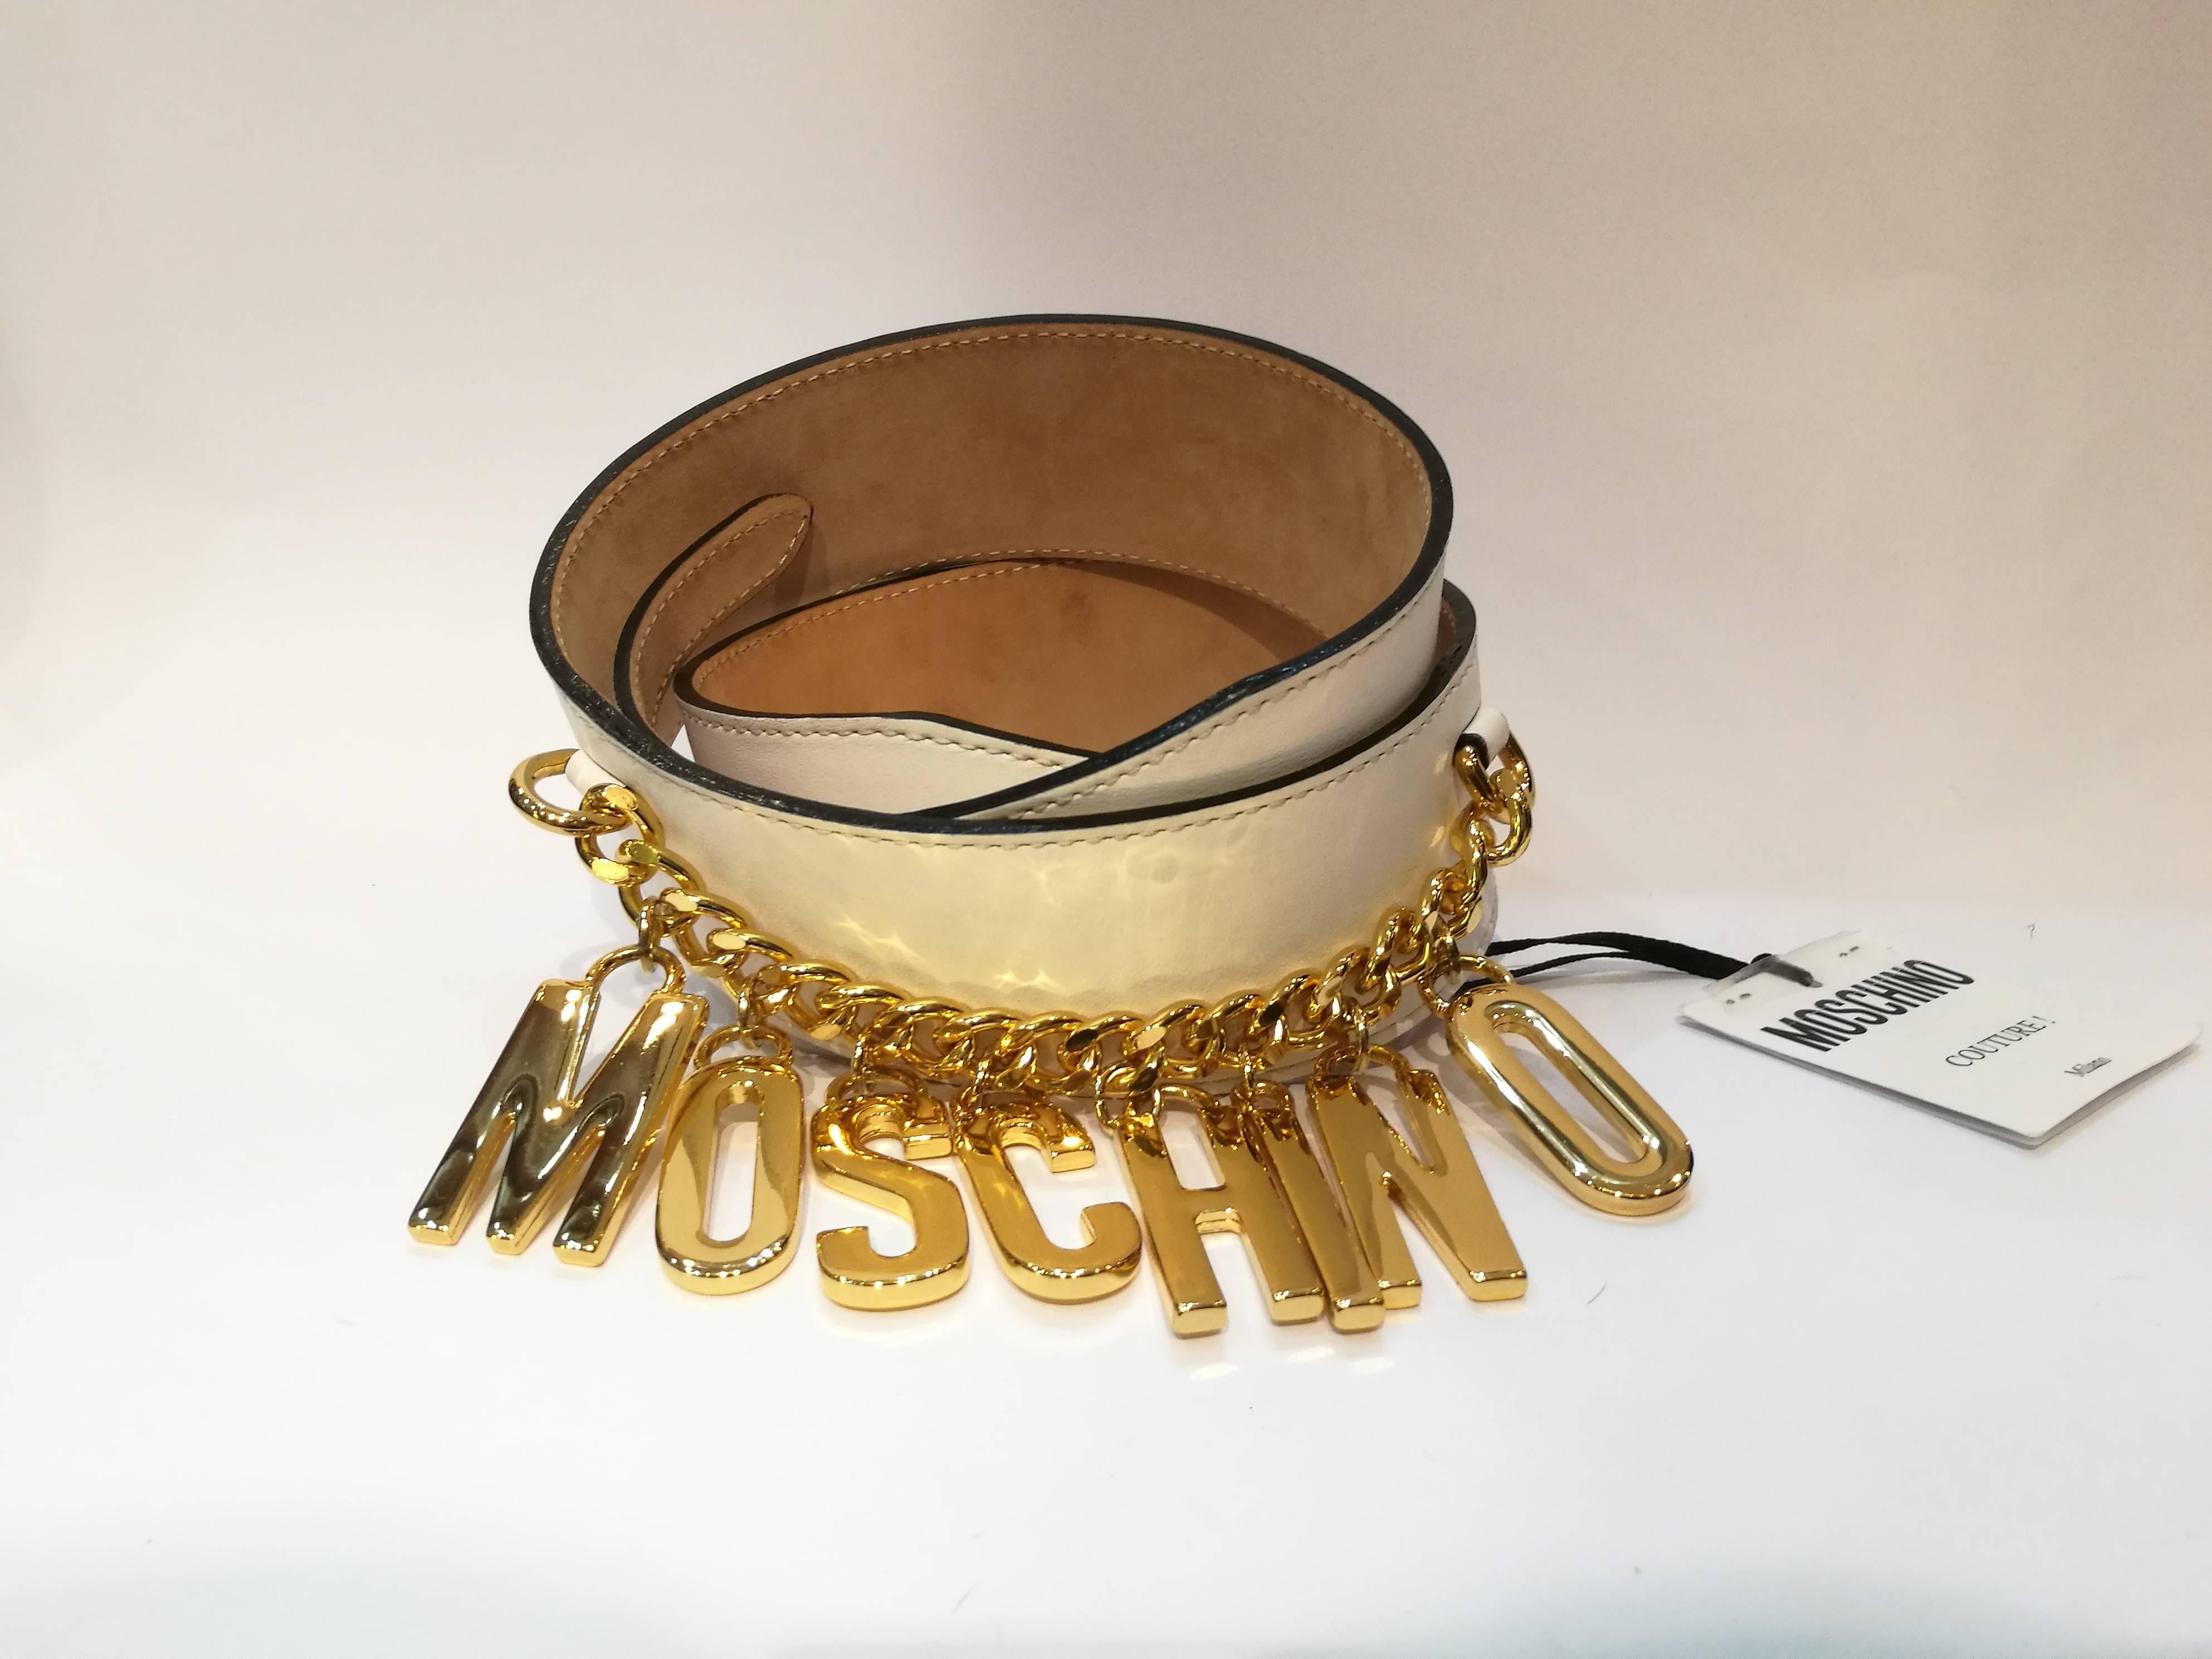 Moschino White Leather Belt
white leather and gold tone hardware